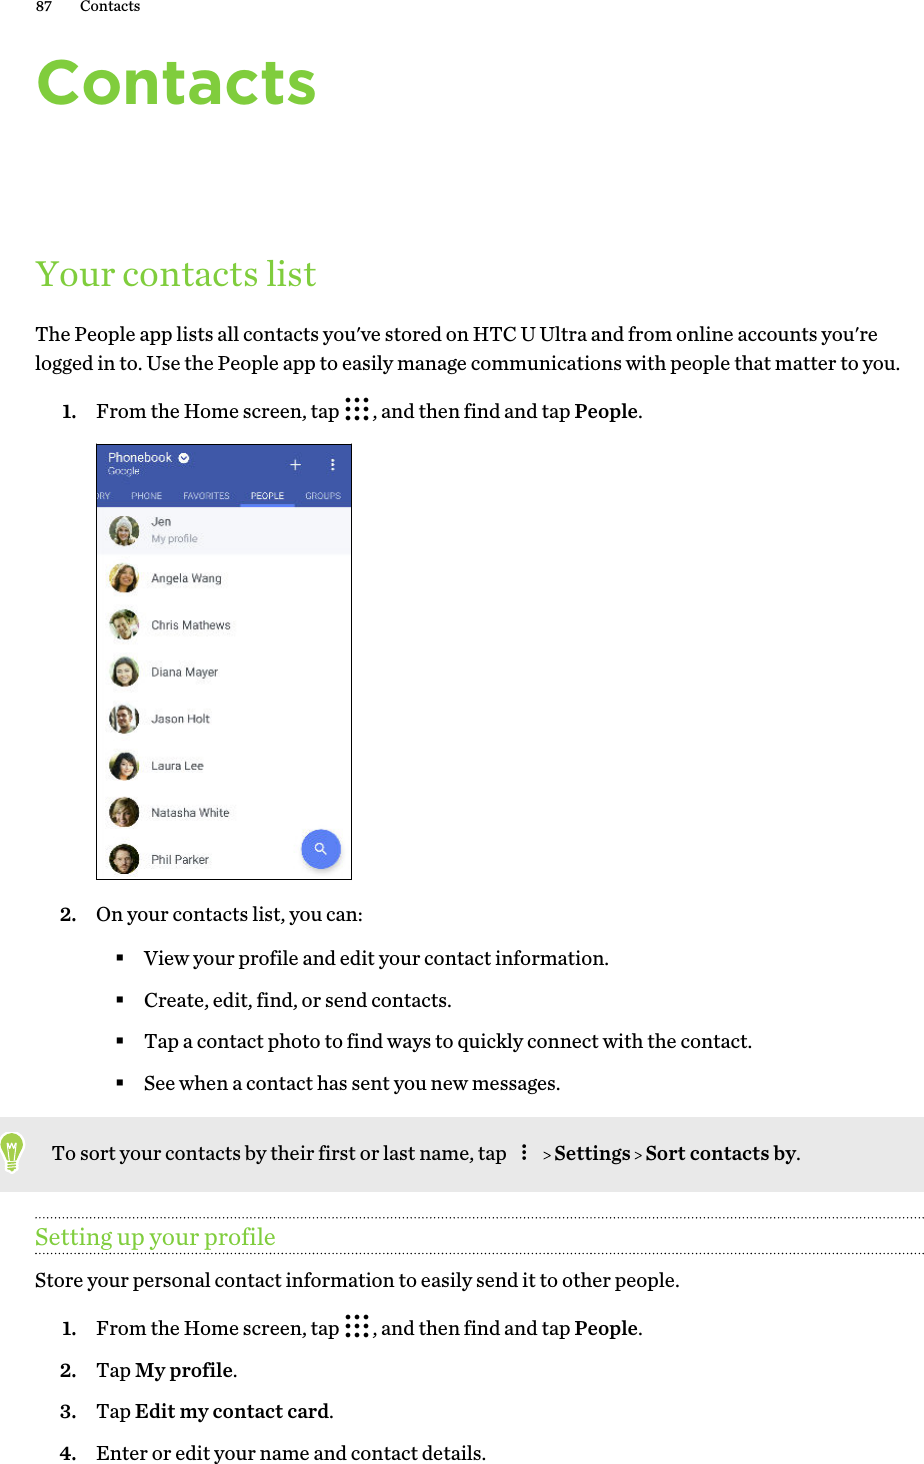 ContactsYour contacts listThe People app lists all contacts you&apos;ve stored on HTC U Ultra and from online accounts you&apos;relogged in to. Use the People app to easily manage communications with people that matter to you.1. From the Home screen, tap  , and then find and tap People. 2. On your contacts list, you can:§View your profile and edit your contact information.§Create, edit, find, or send contacts.§Tap a contact photo to find ways to quickly connect with the contact.§See when a contact has sent you new messages.To sort your contacts by their first or last name, tap     Settings   Sort contacts by.Setting up your profileStore your personal contact information to easily send it to other people.1. From the Home screen, tap  , and then find and tap People.2. Tap My profile.3. Tap Edit my contact card.4. Enter or edit your name and contact details.87 Contacts